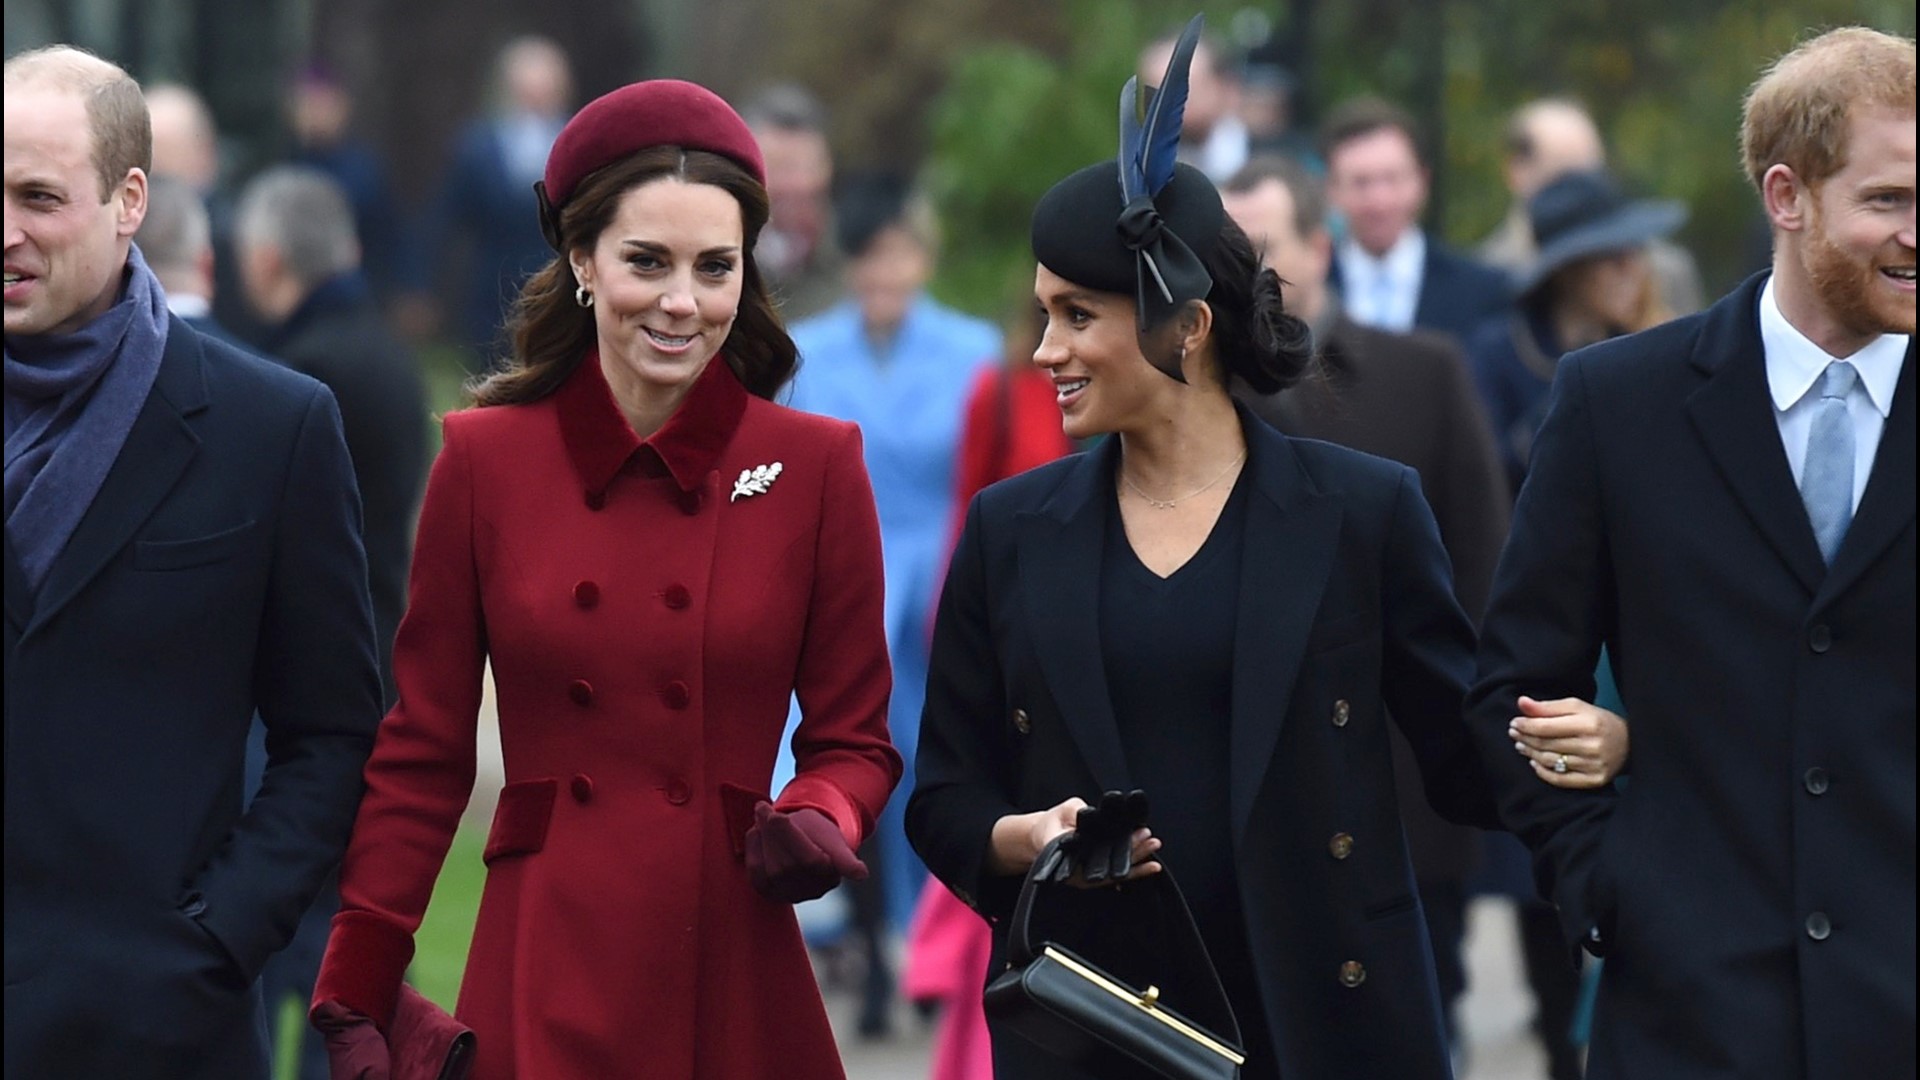 Prince Harry and Meghan Markle reportedly have no plans to spend the special day at Sandringham. Veuer's Chloe Hurst has the story!